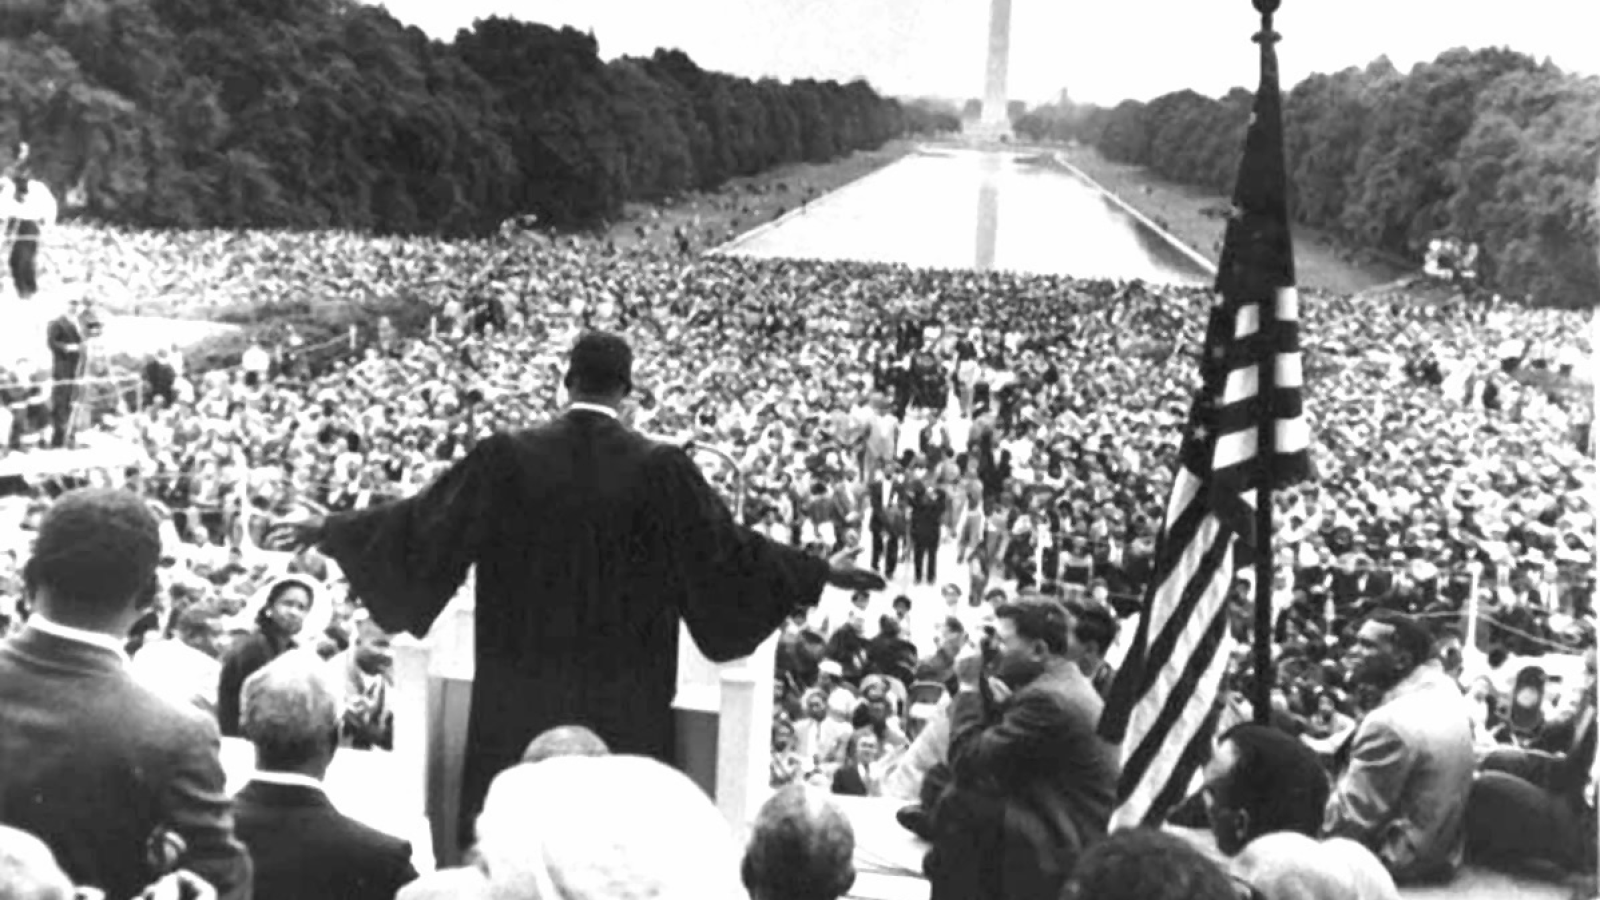 Martin Luther King Jr. addresses crowd of 250,000 from the steps of the Lincoln Memorial. King has arms outstretched and is wearing a black robe with an American flag to his right. Photo is taken from behind with reflecting pool and Washington monument visible in the distance.